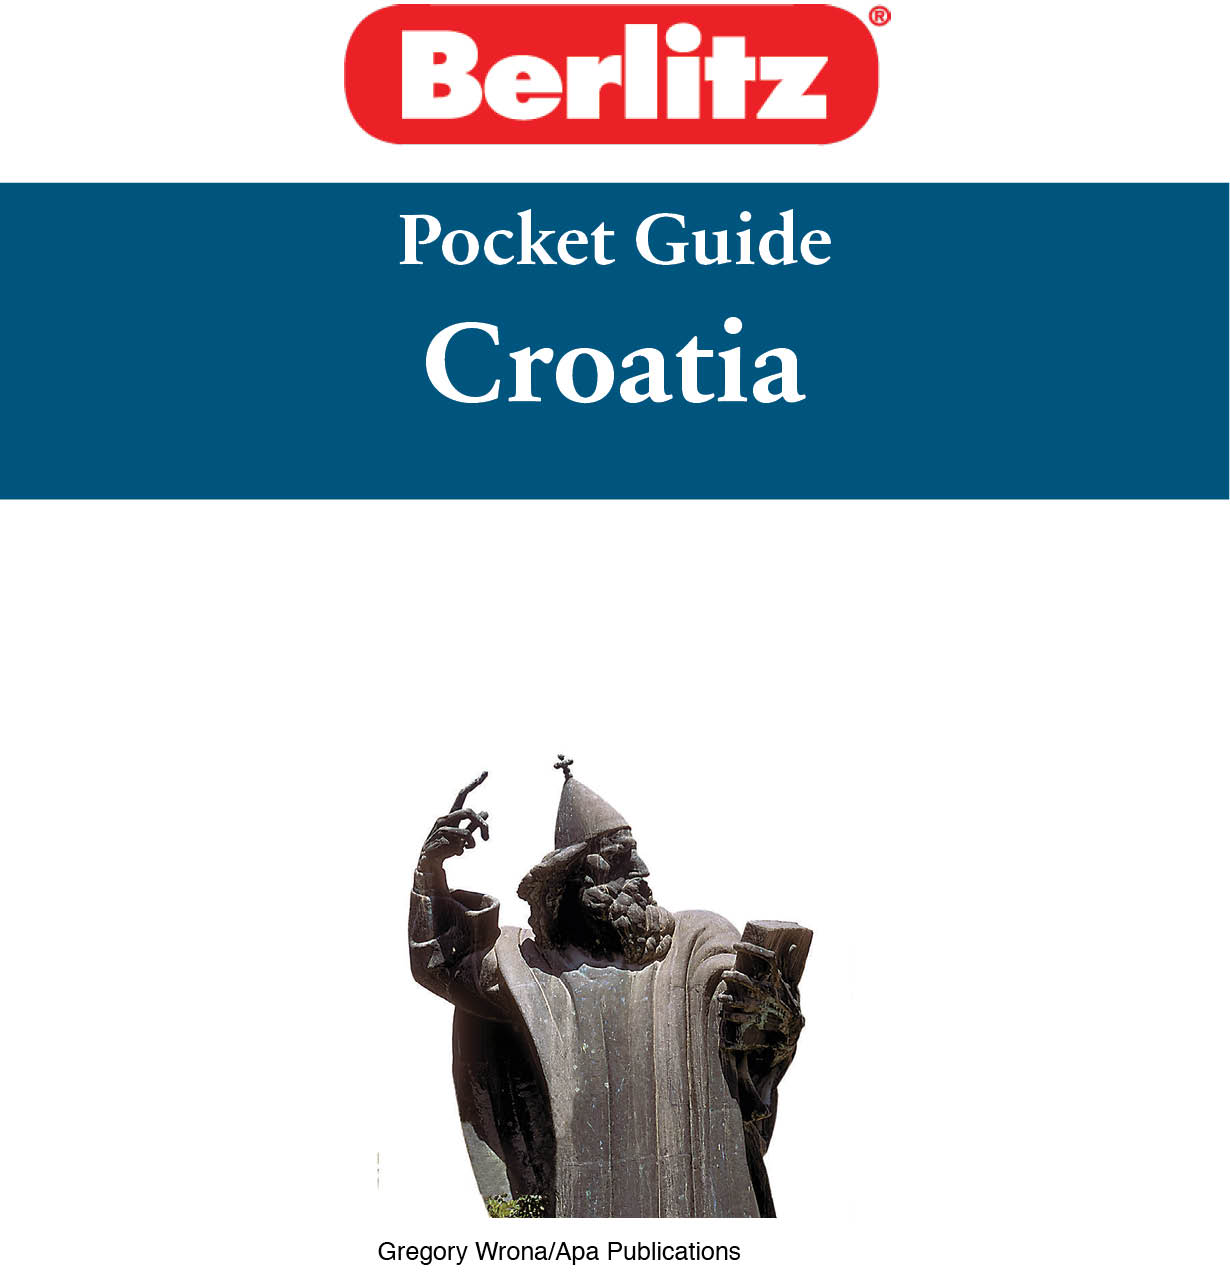 How To Use This E-Book Getting Around the e-Book This Berlitz Pocket Guide - photo 2